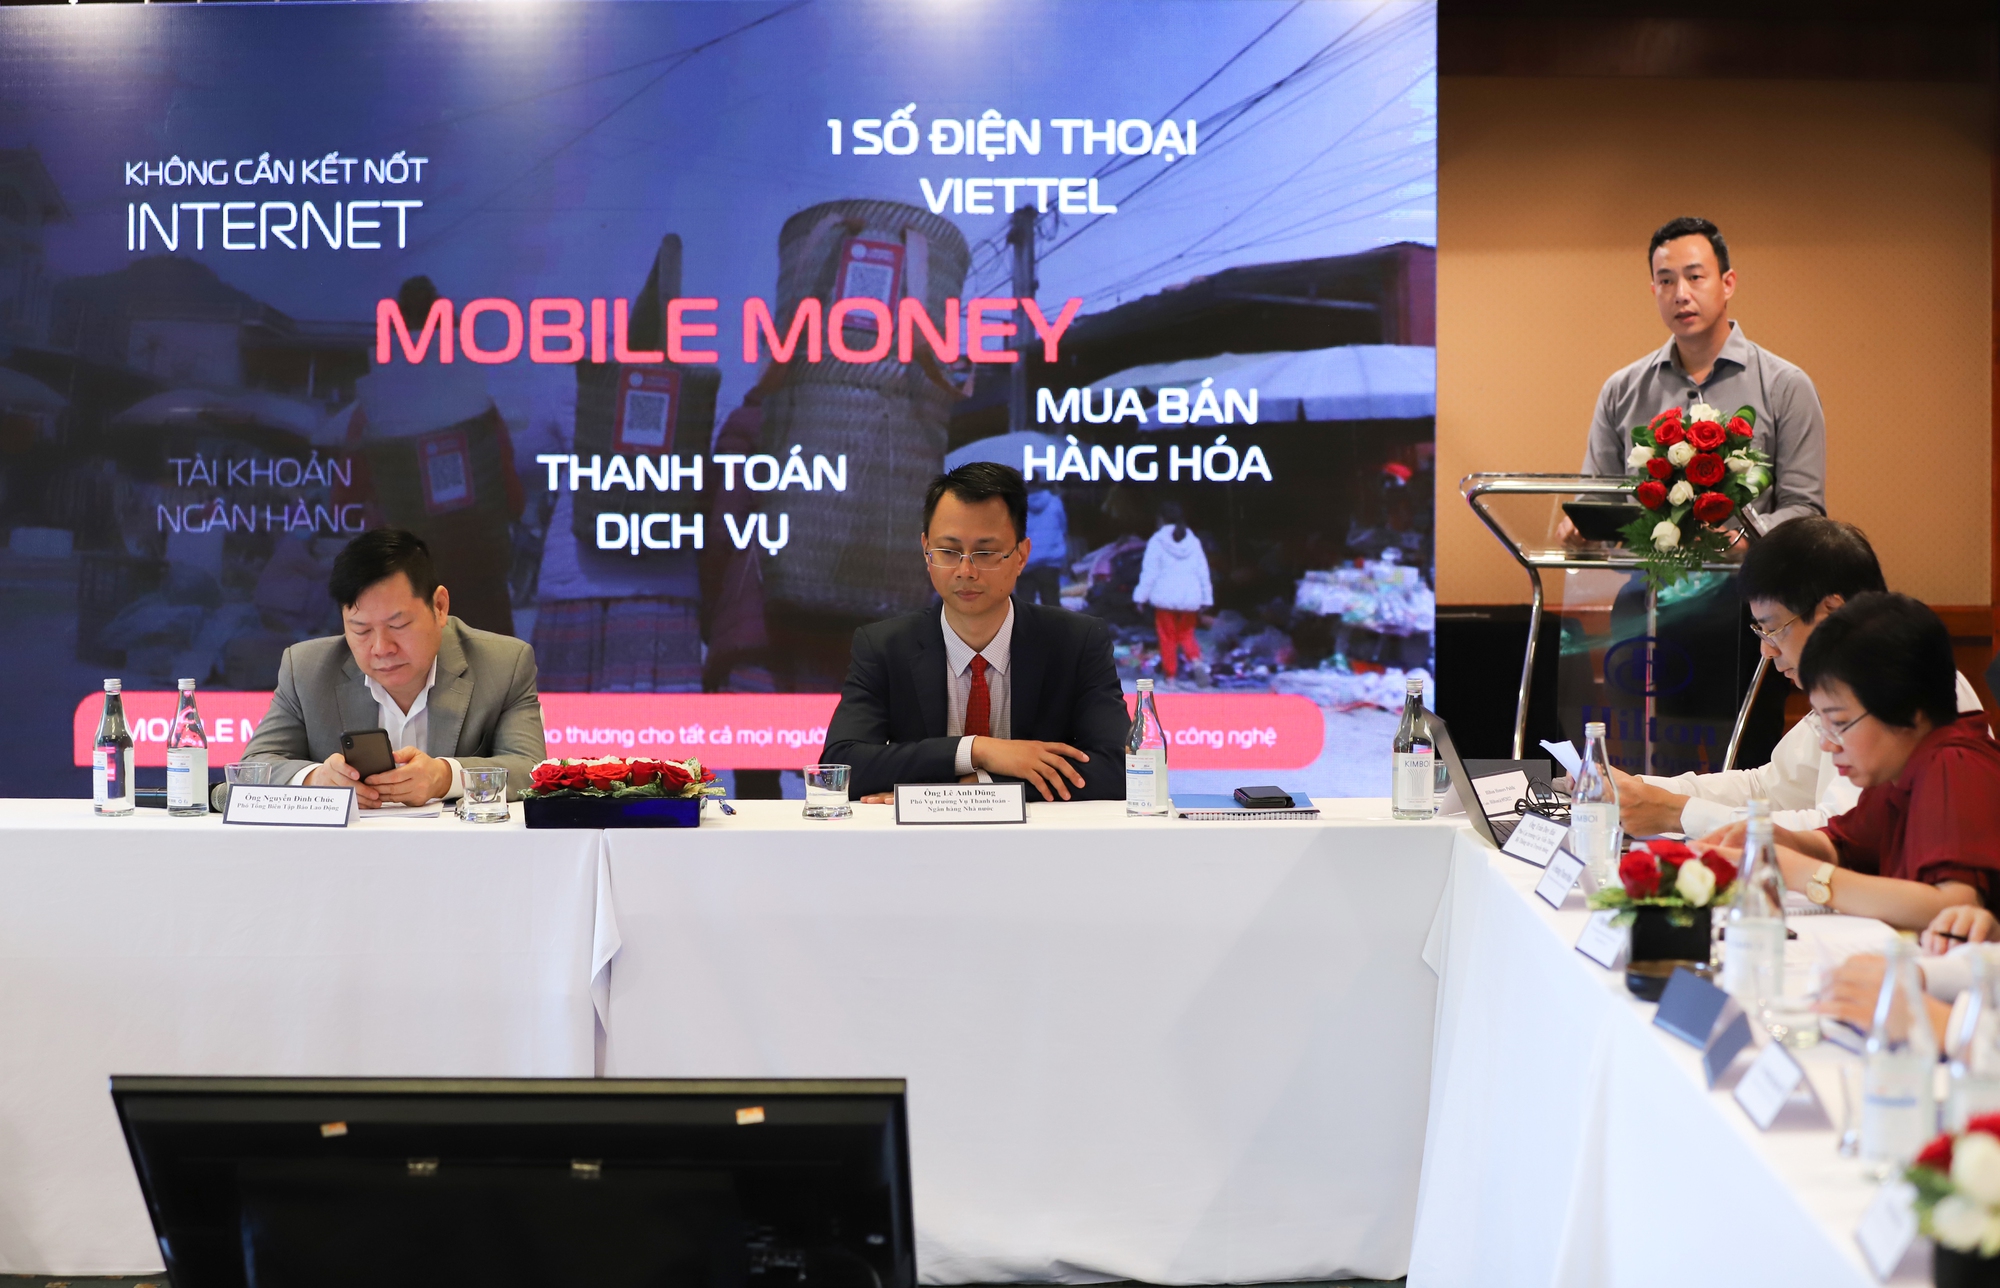 Mobile-Money: More than VND 370 billion of transactions, no risks yet - Photo 2.